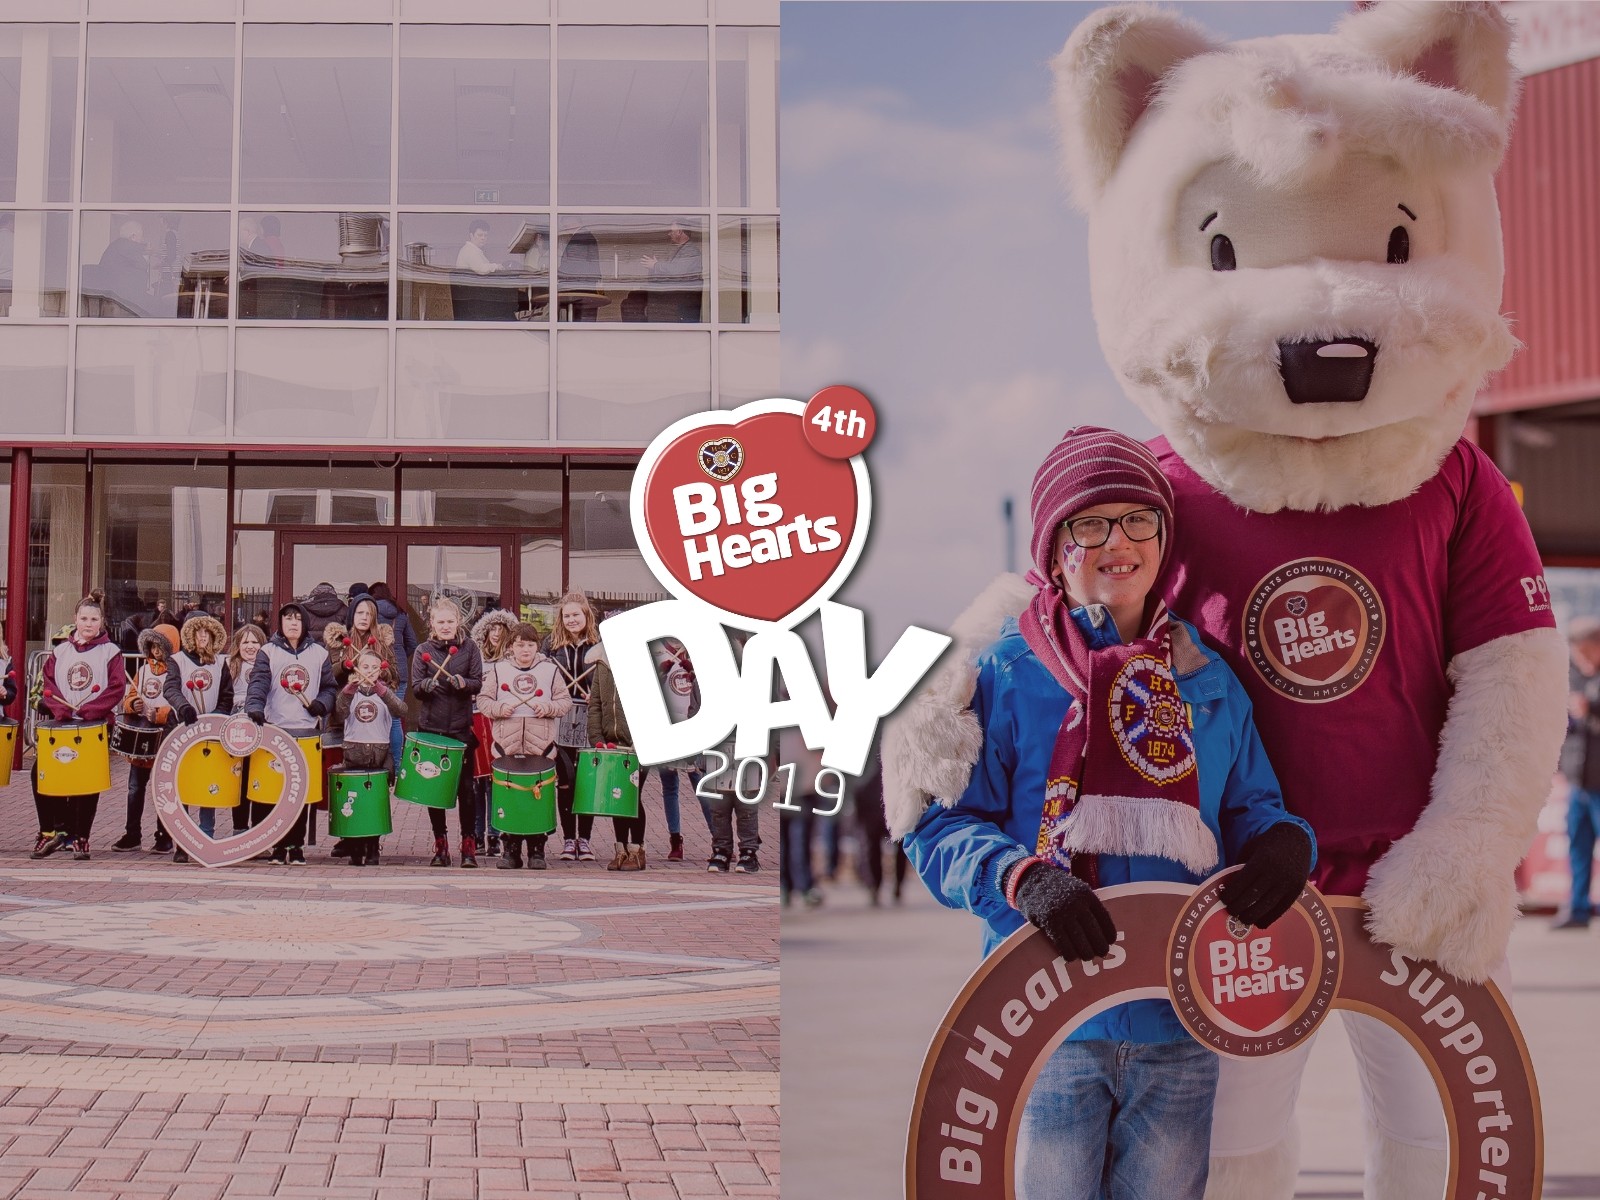  » Big Hearts Day 2019: Match day info for supporters